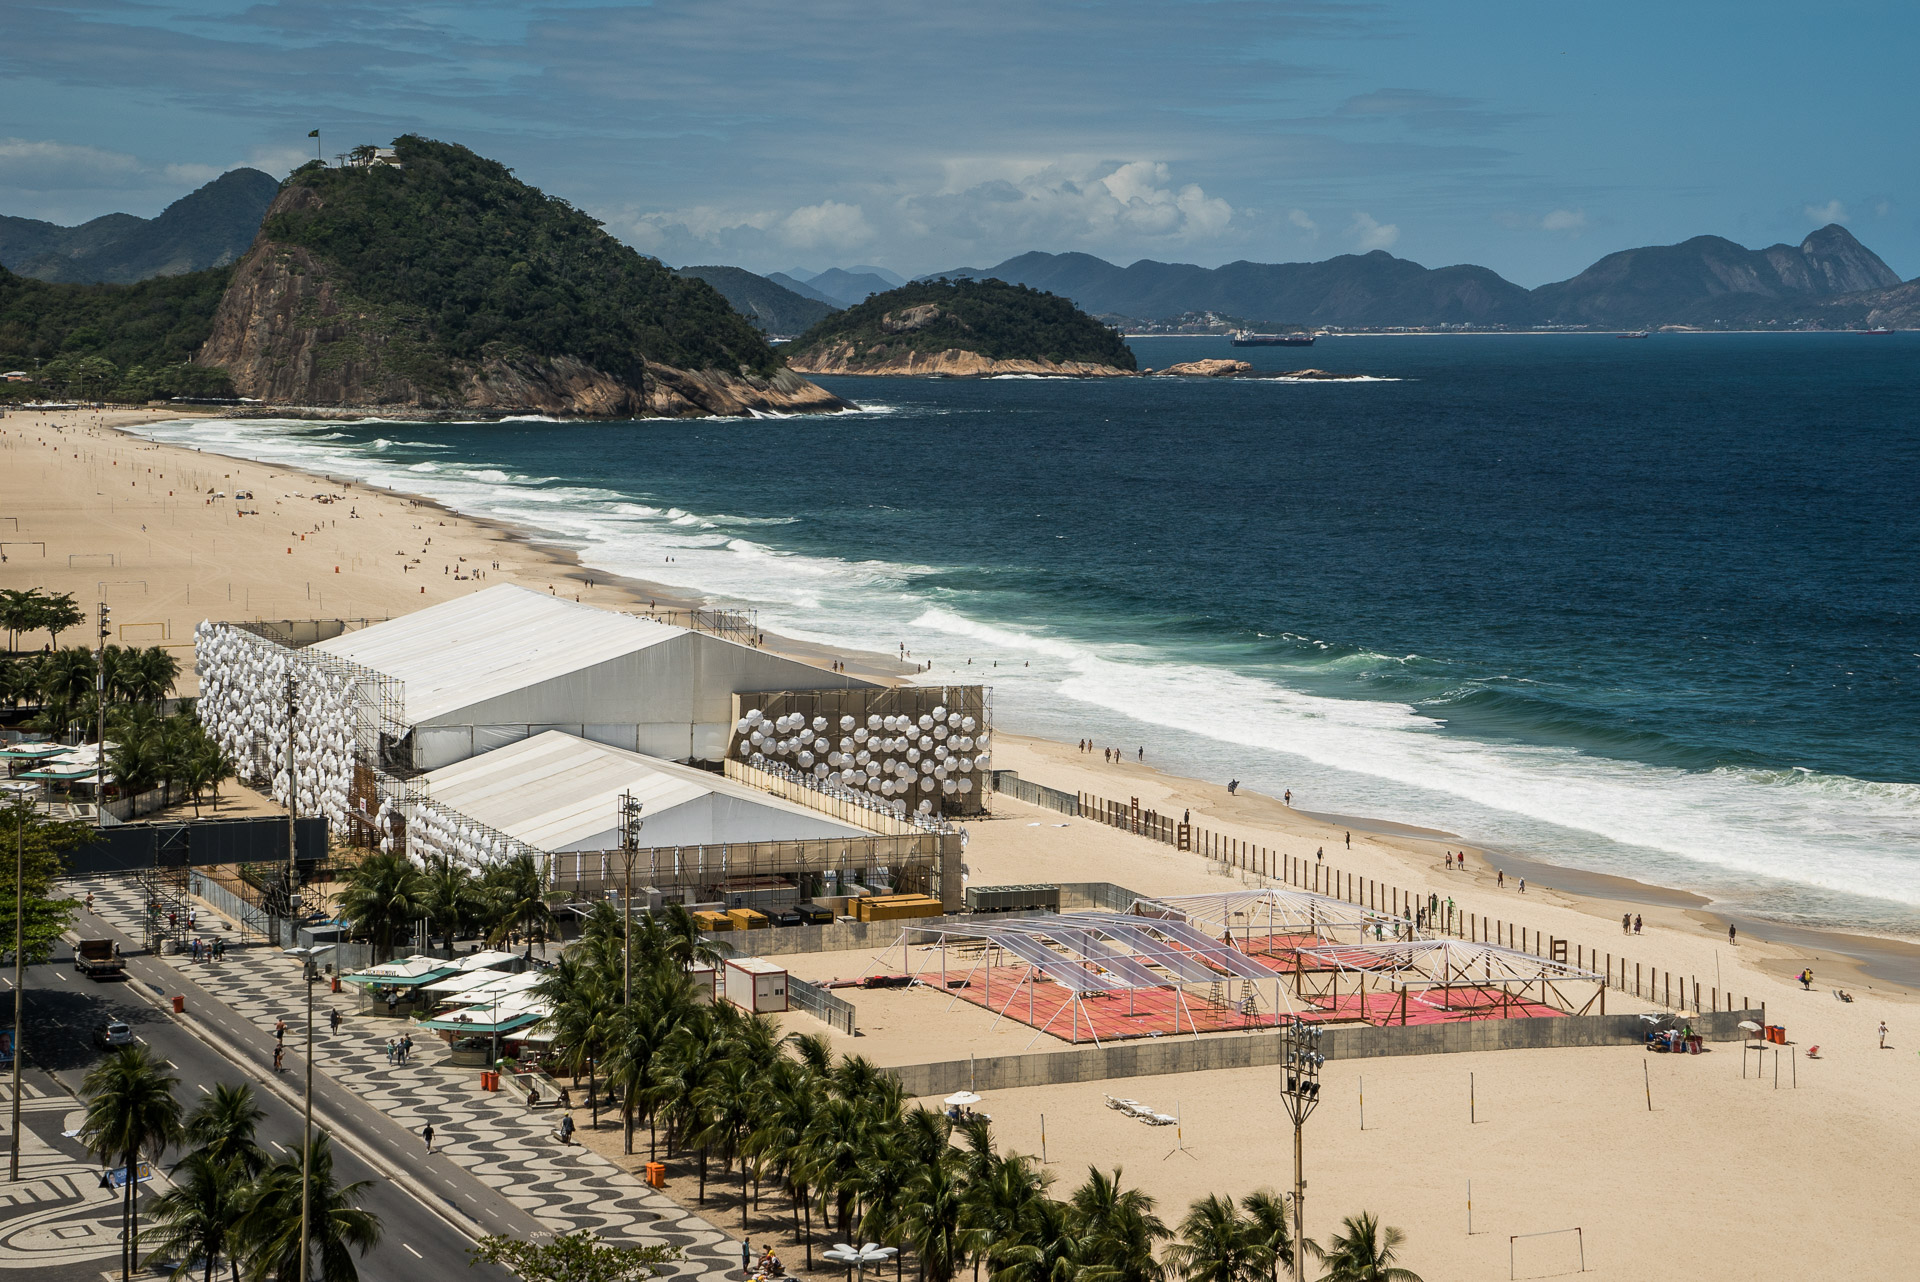 A first look at the beachside theater, built especially for TEDGlobal 2014. Photo: James Duncan Davidson